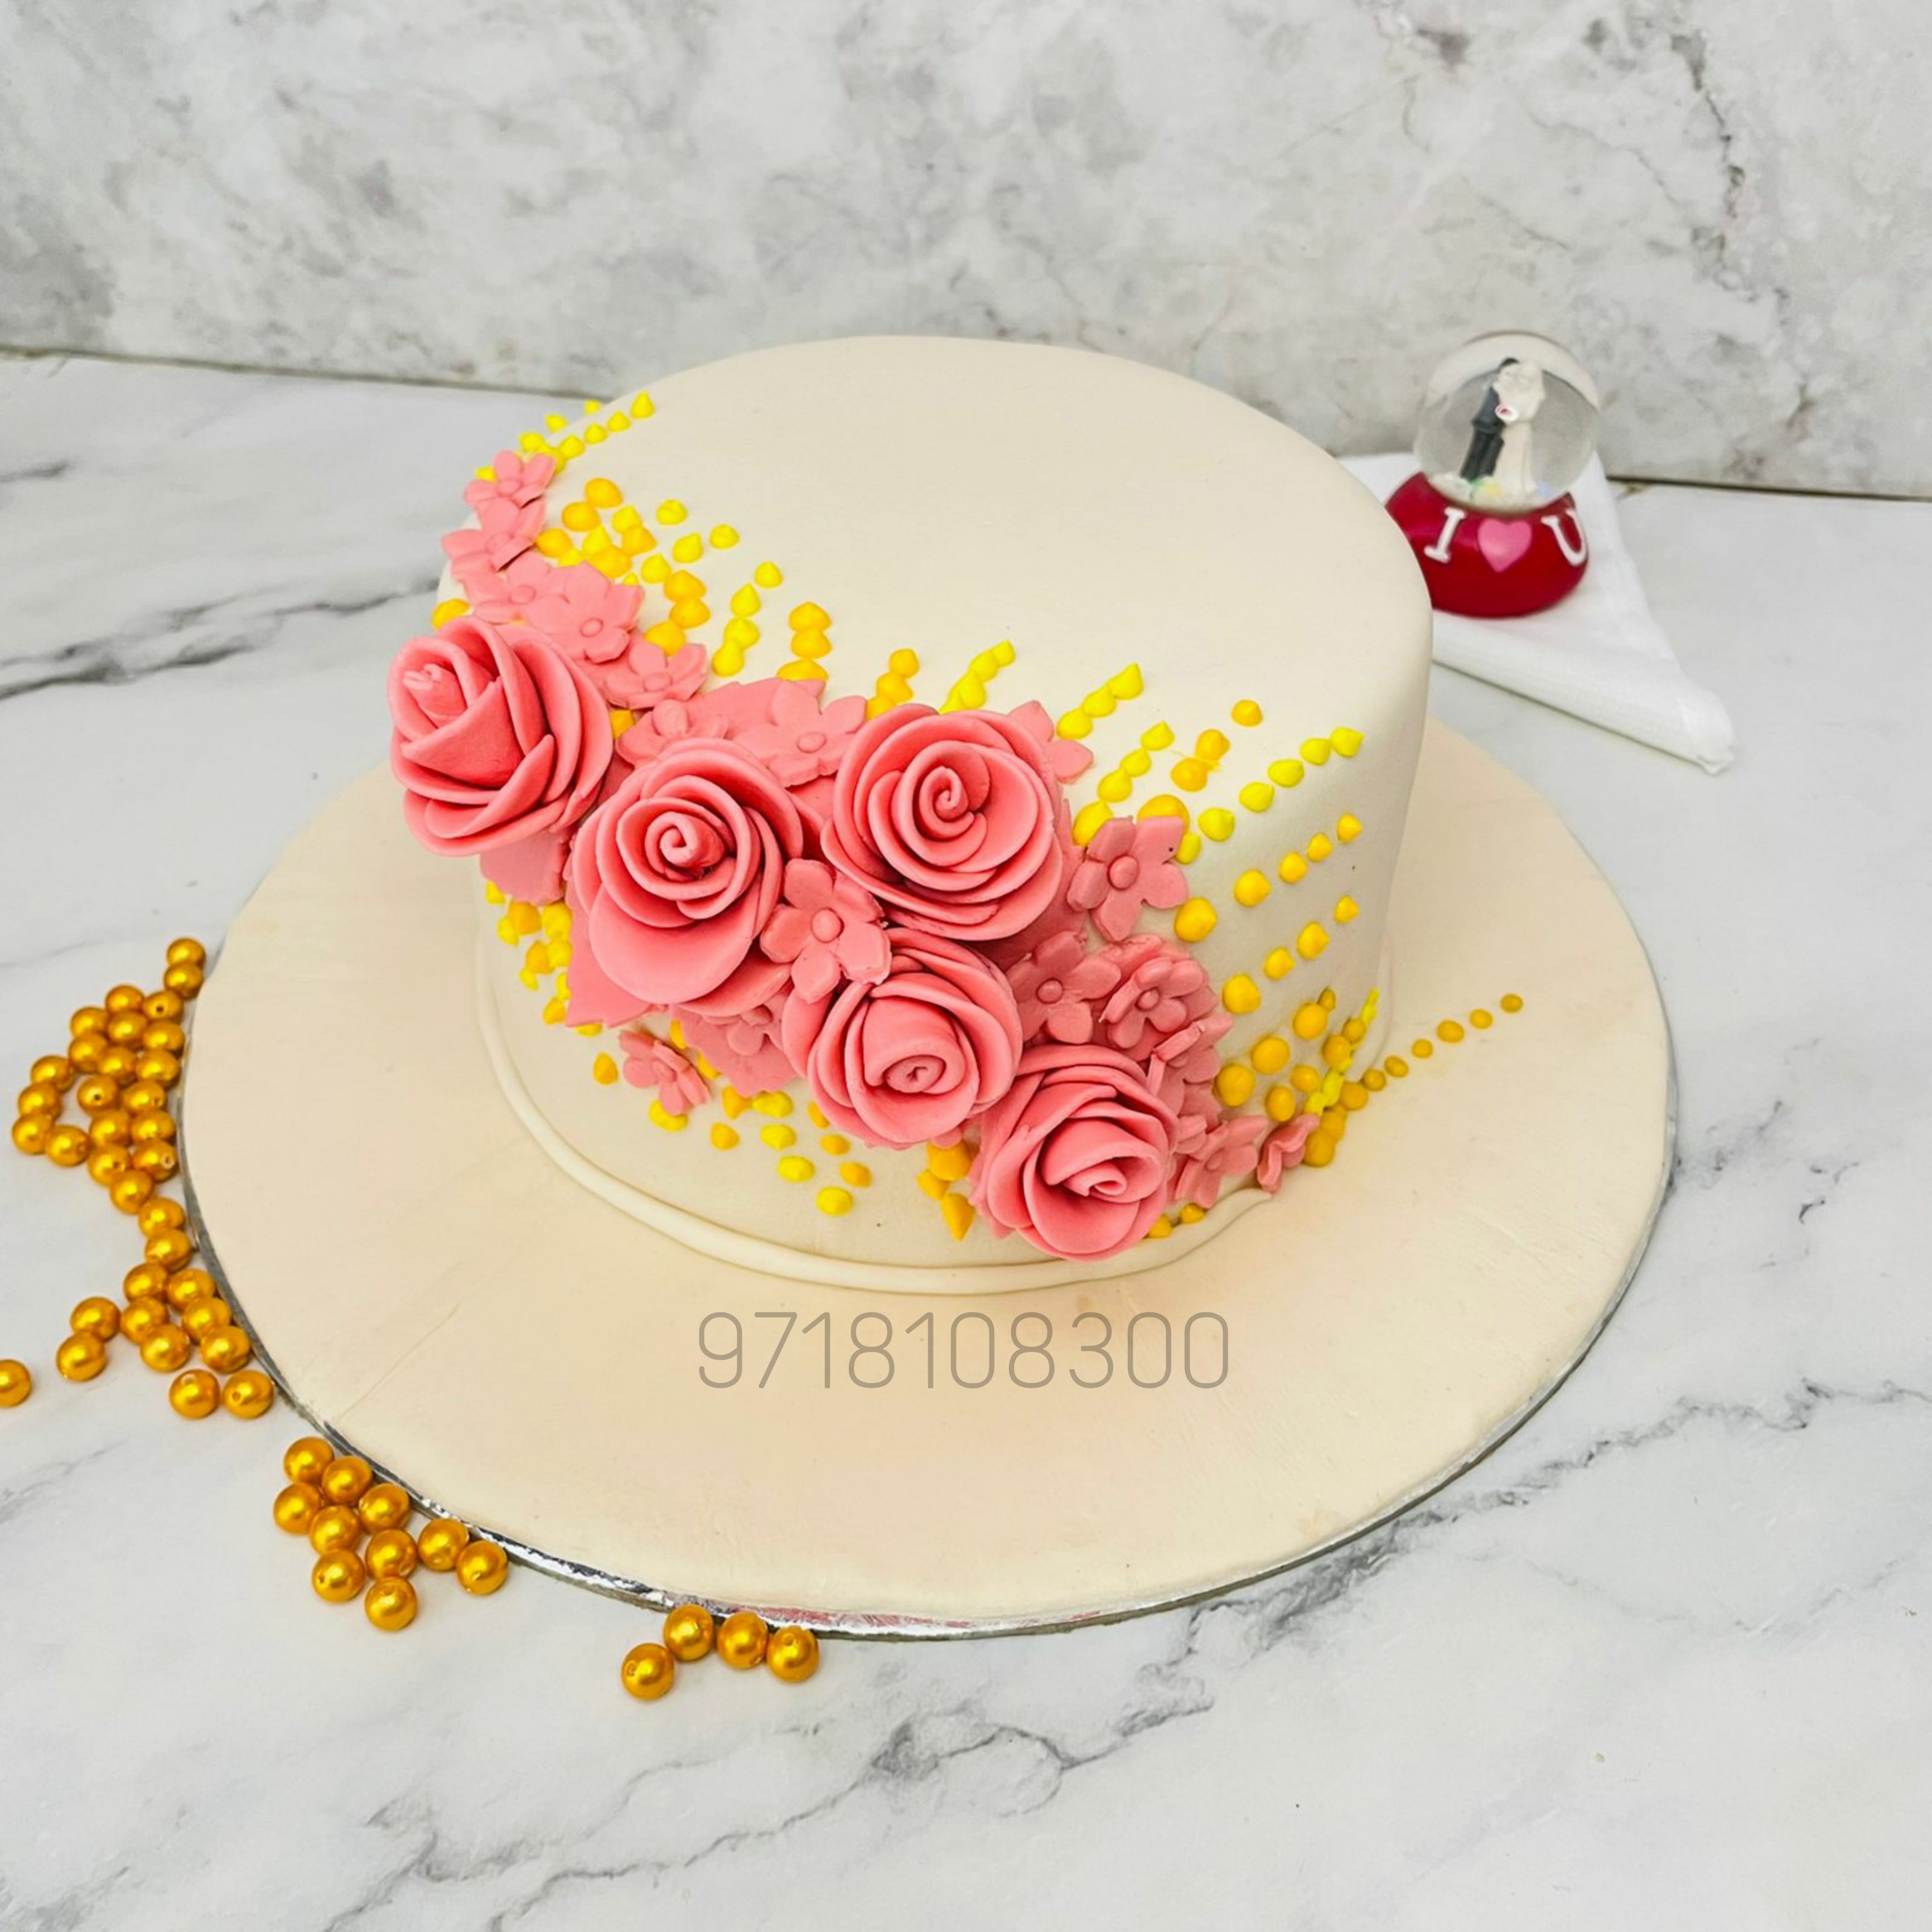 55+ Cute Cake Ideas For Your Next Party : Pressed Floral White Cake